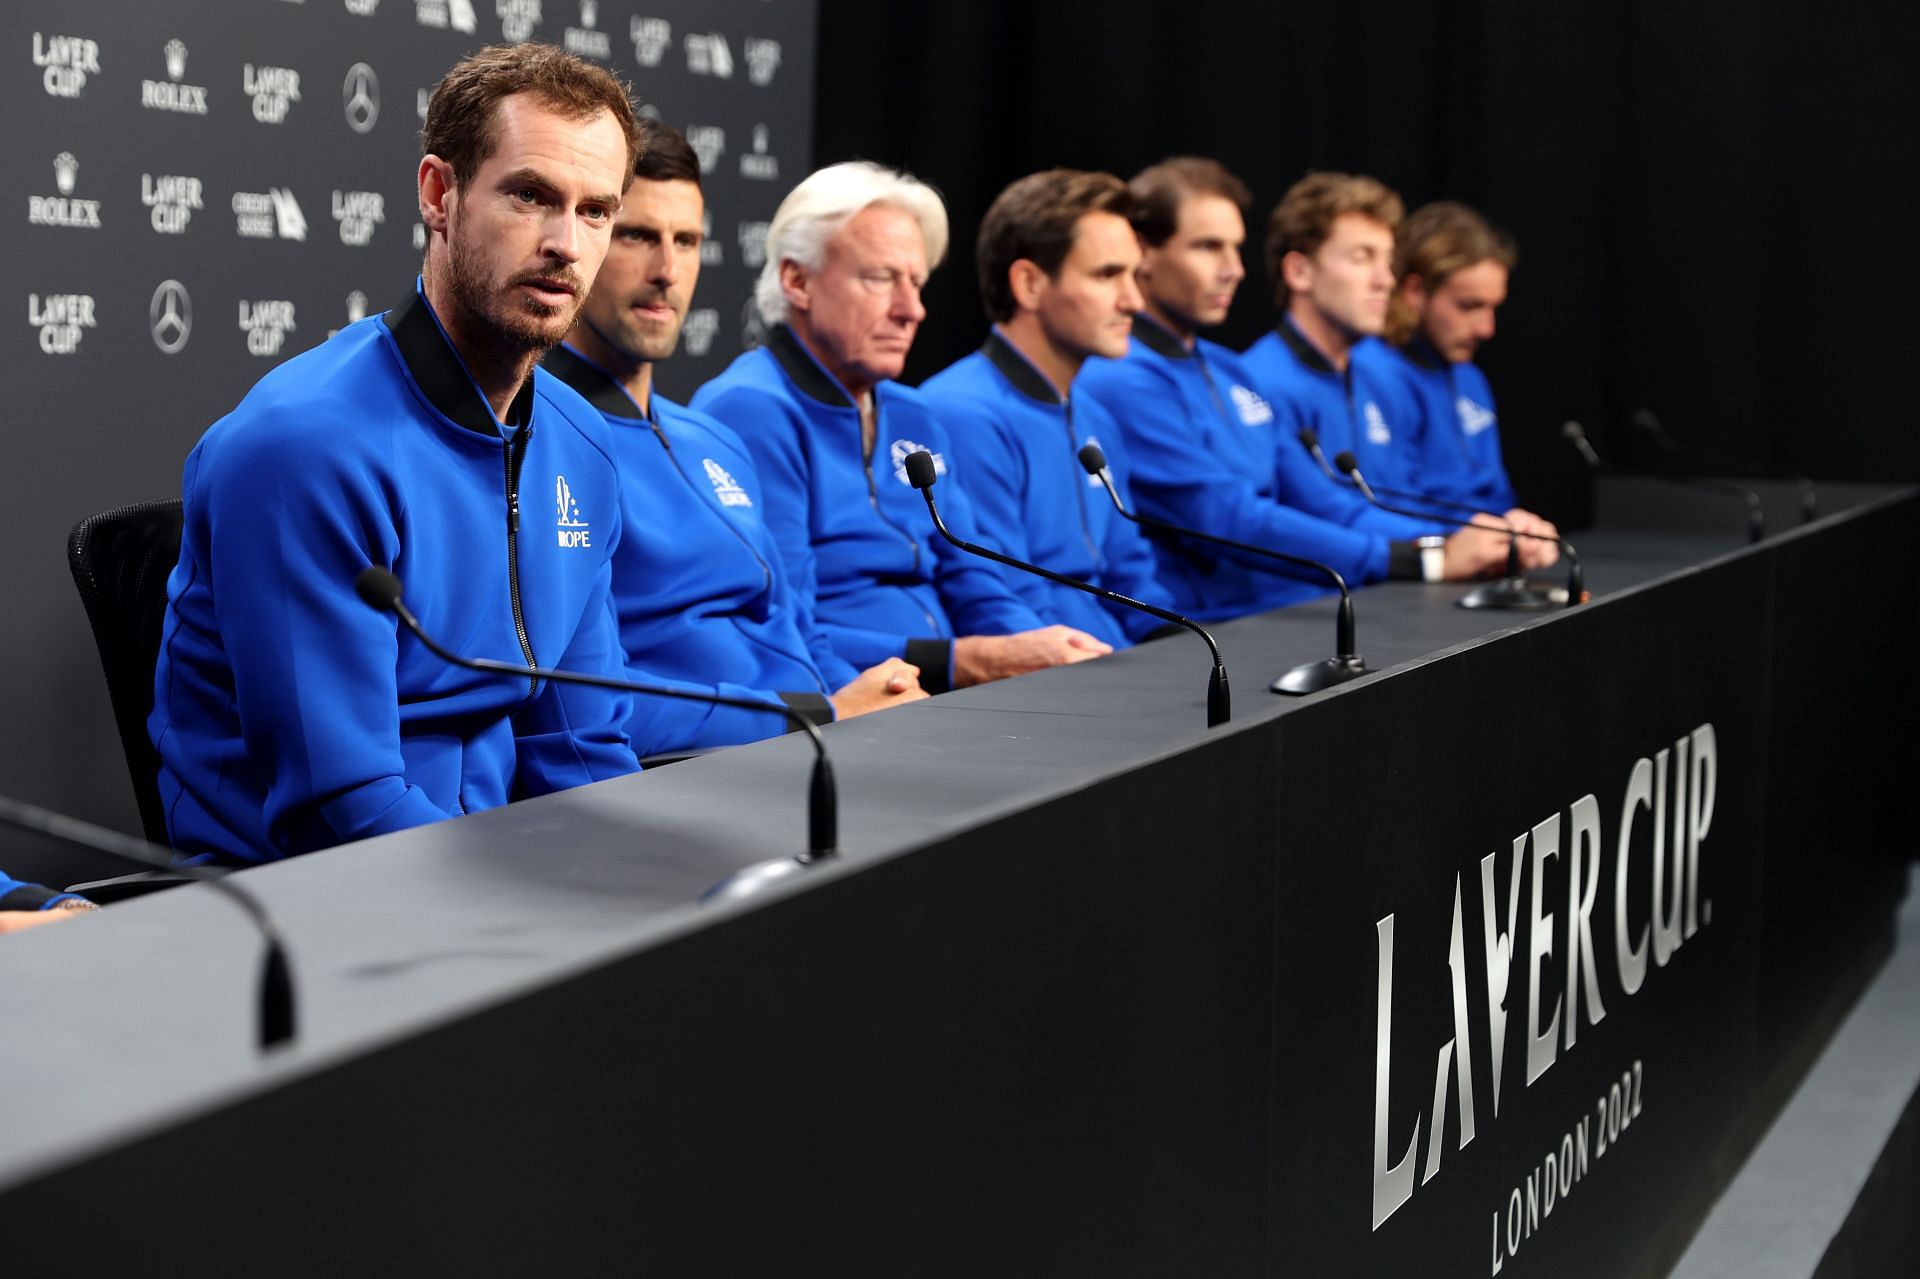 Roger Federer (fourth form left) at a press conference for Team Europe at the 2022 Laver Cup